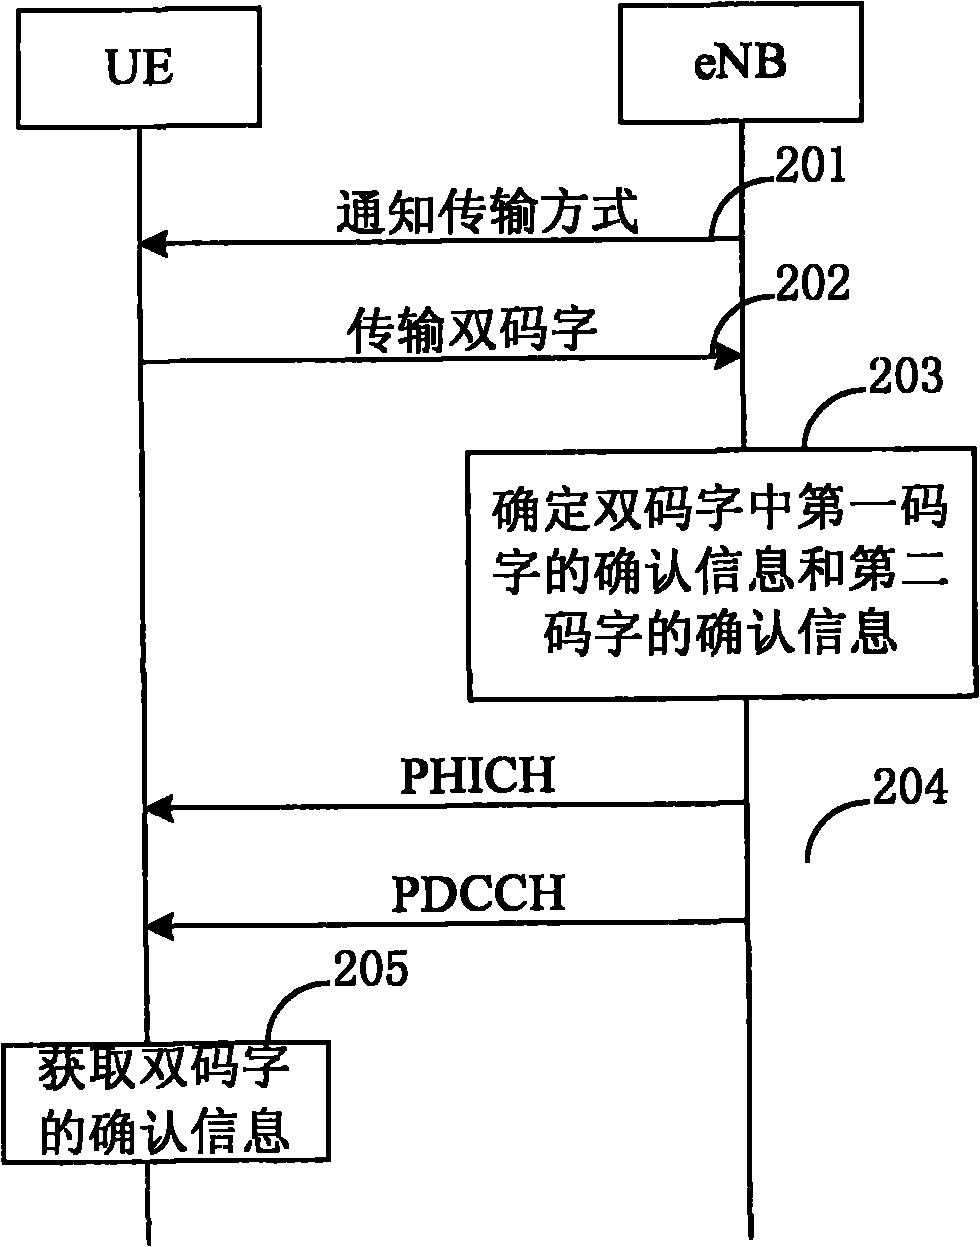 Code word acknowledgement information feedback method and communication device